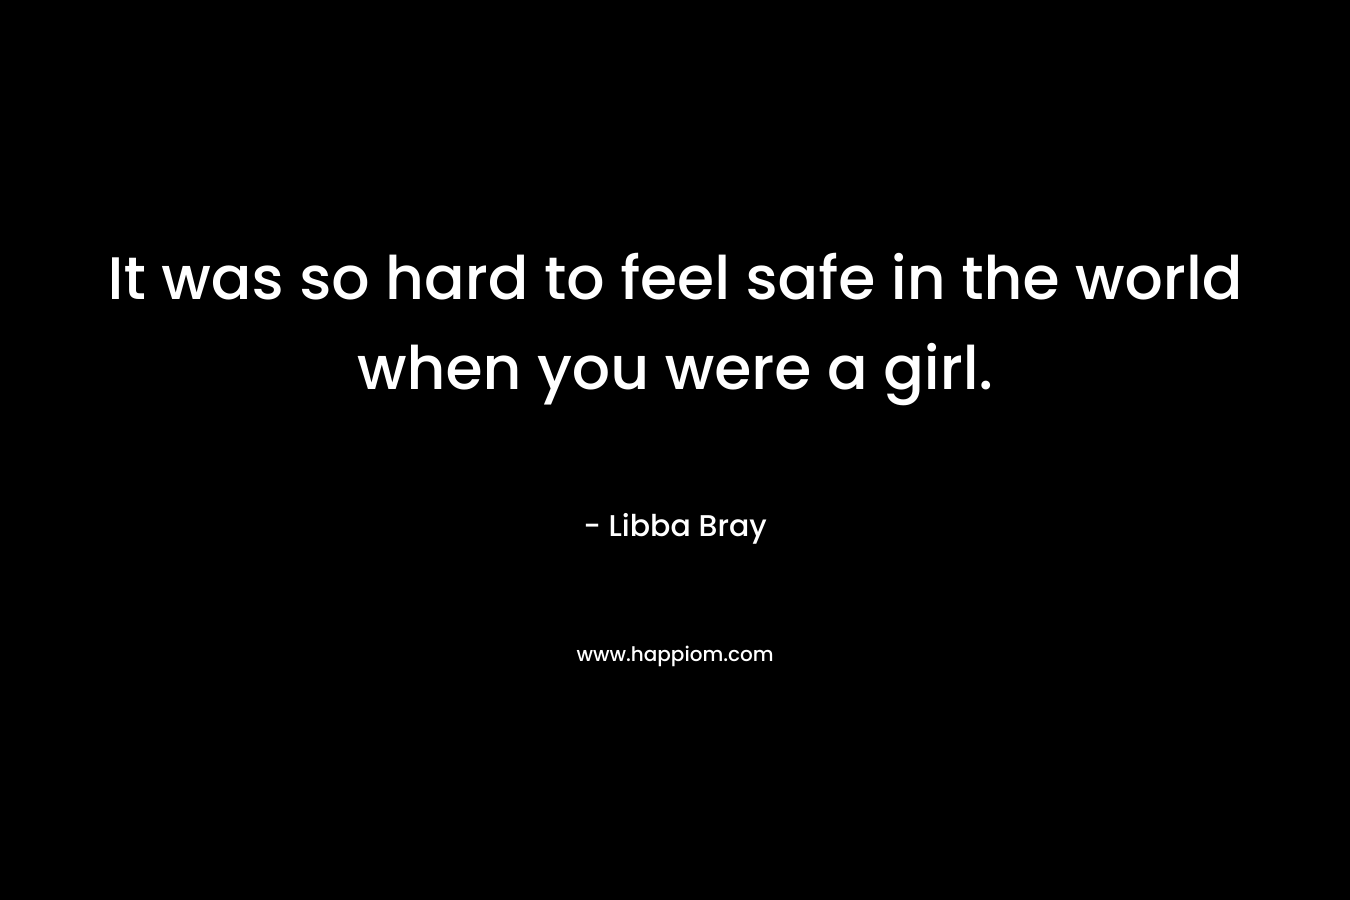 It was so hard to feel safe in the world when you were a girl.